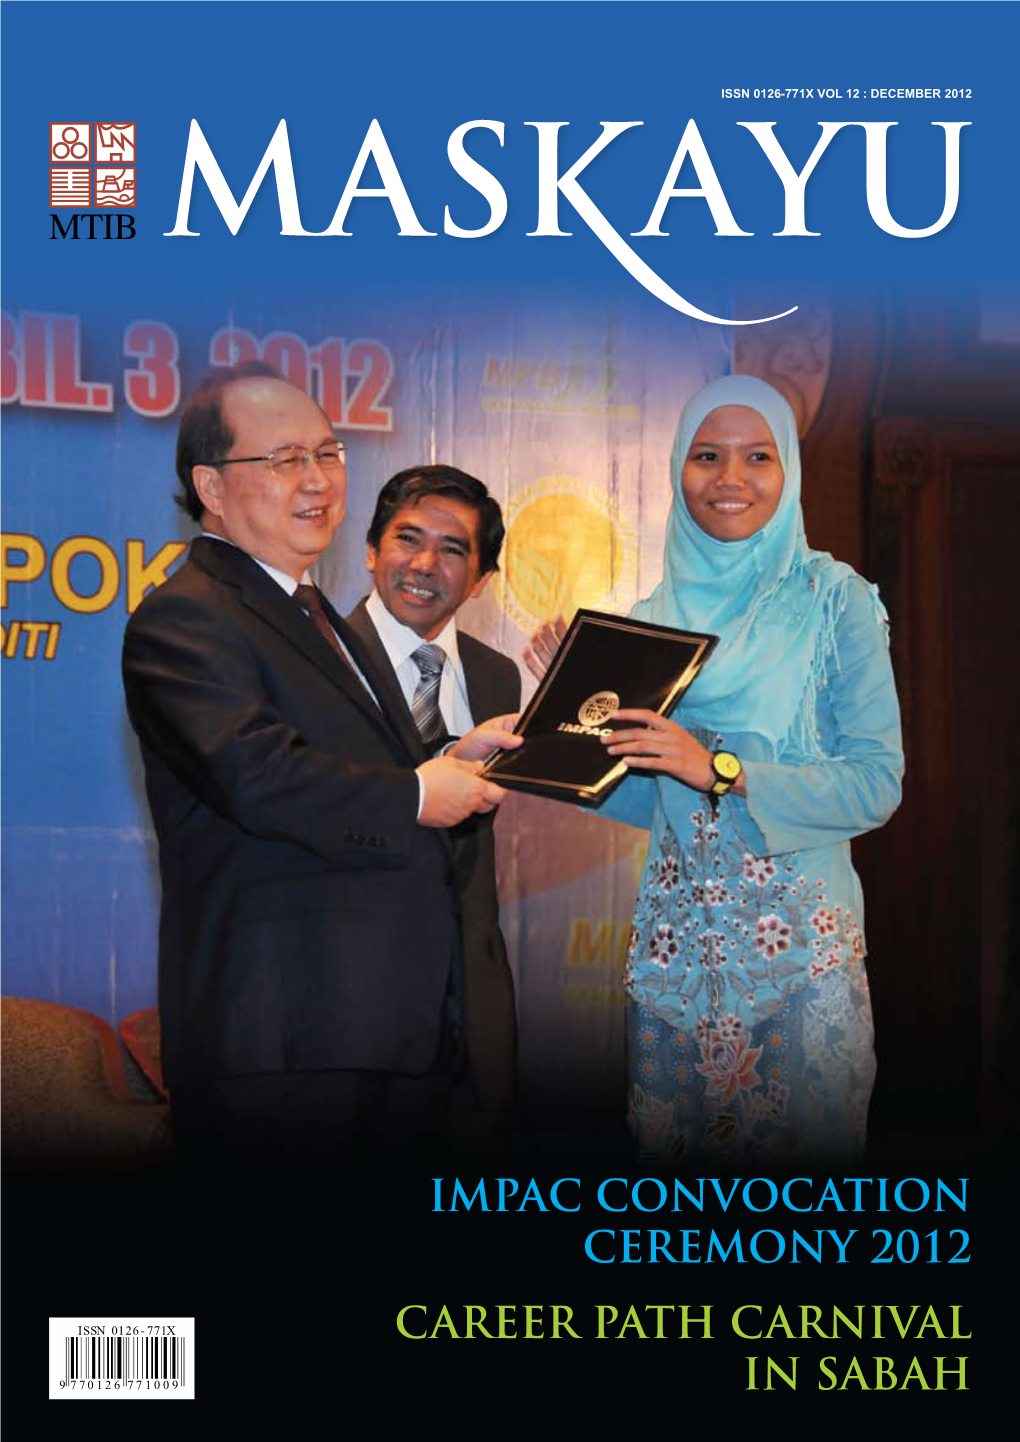 IMPAC Convocation Ceremony 2012 Career Path Carnival in Sabah Editorial Board Chief Editor Publisher Dr